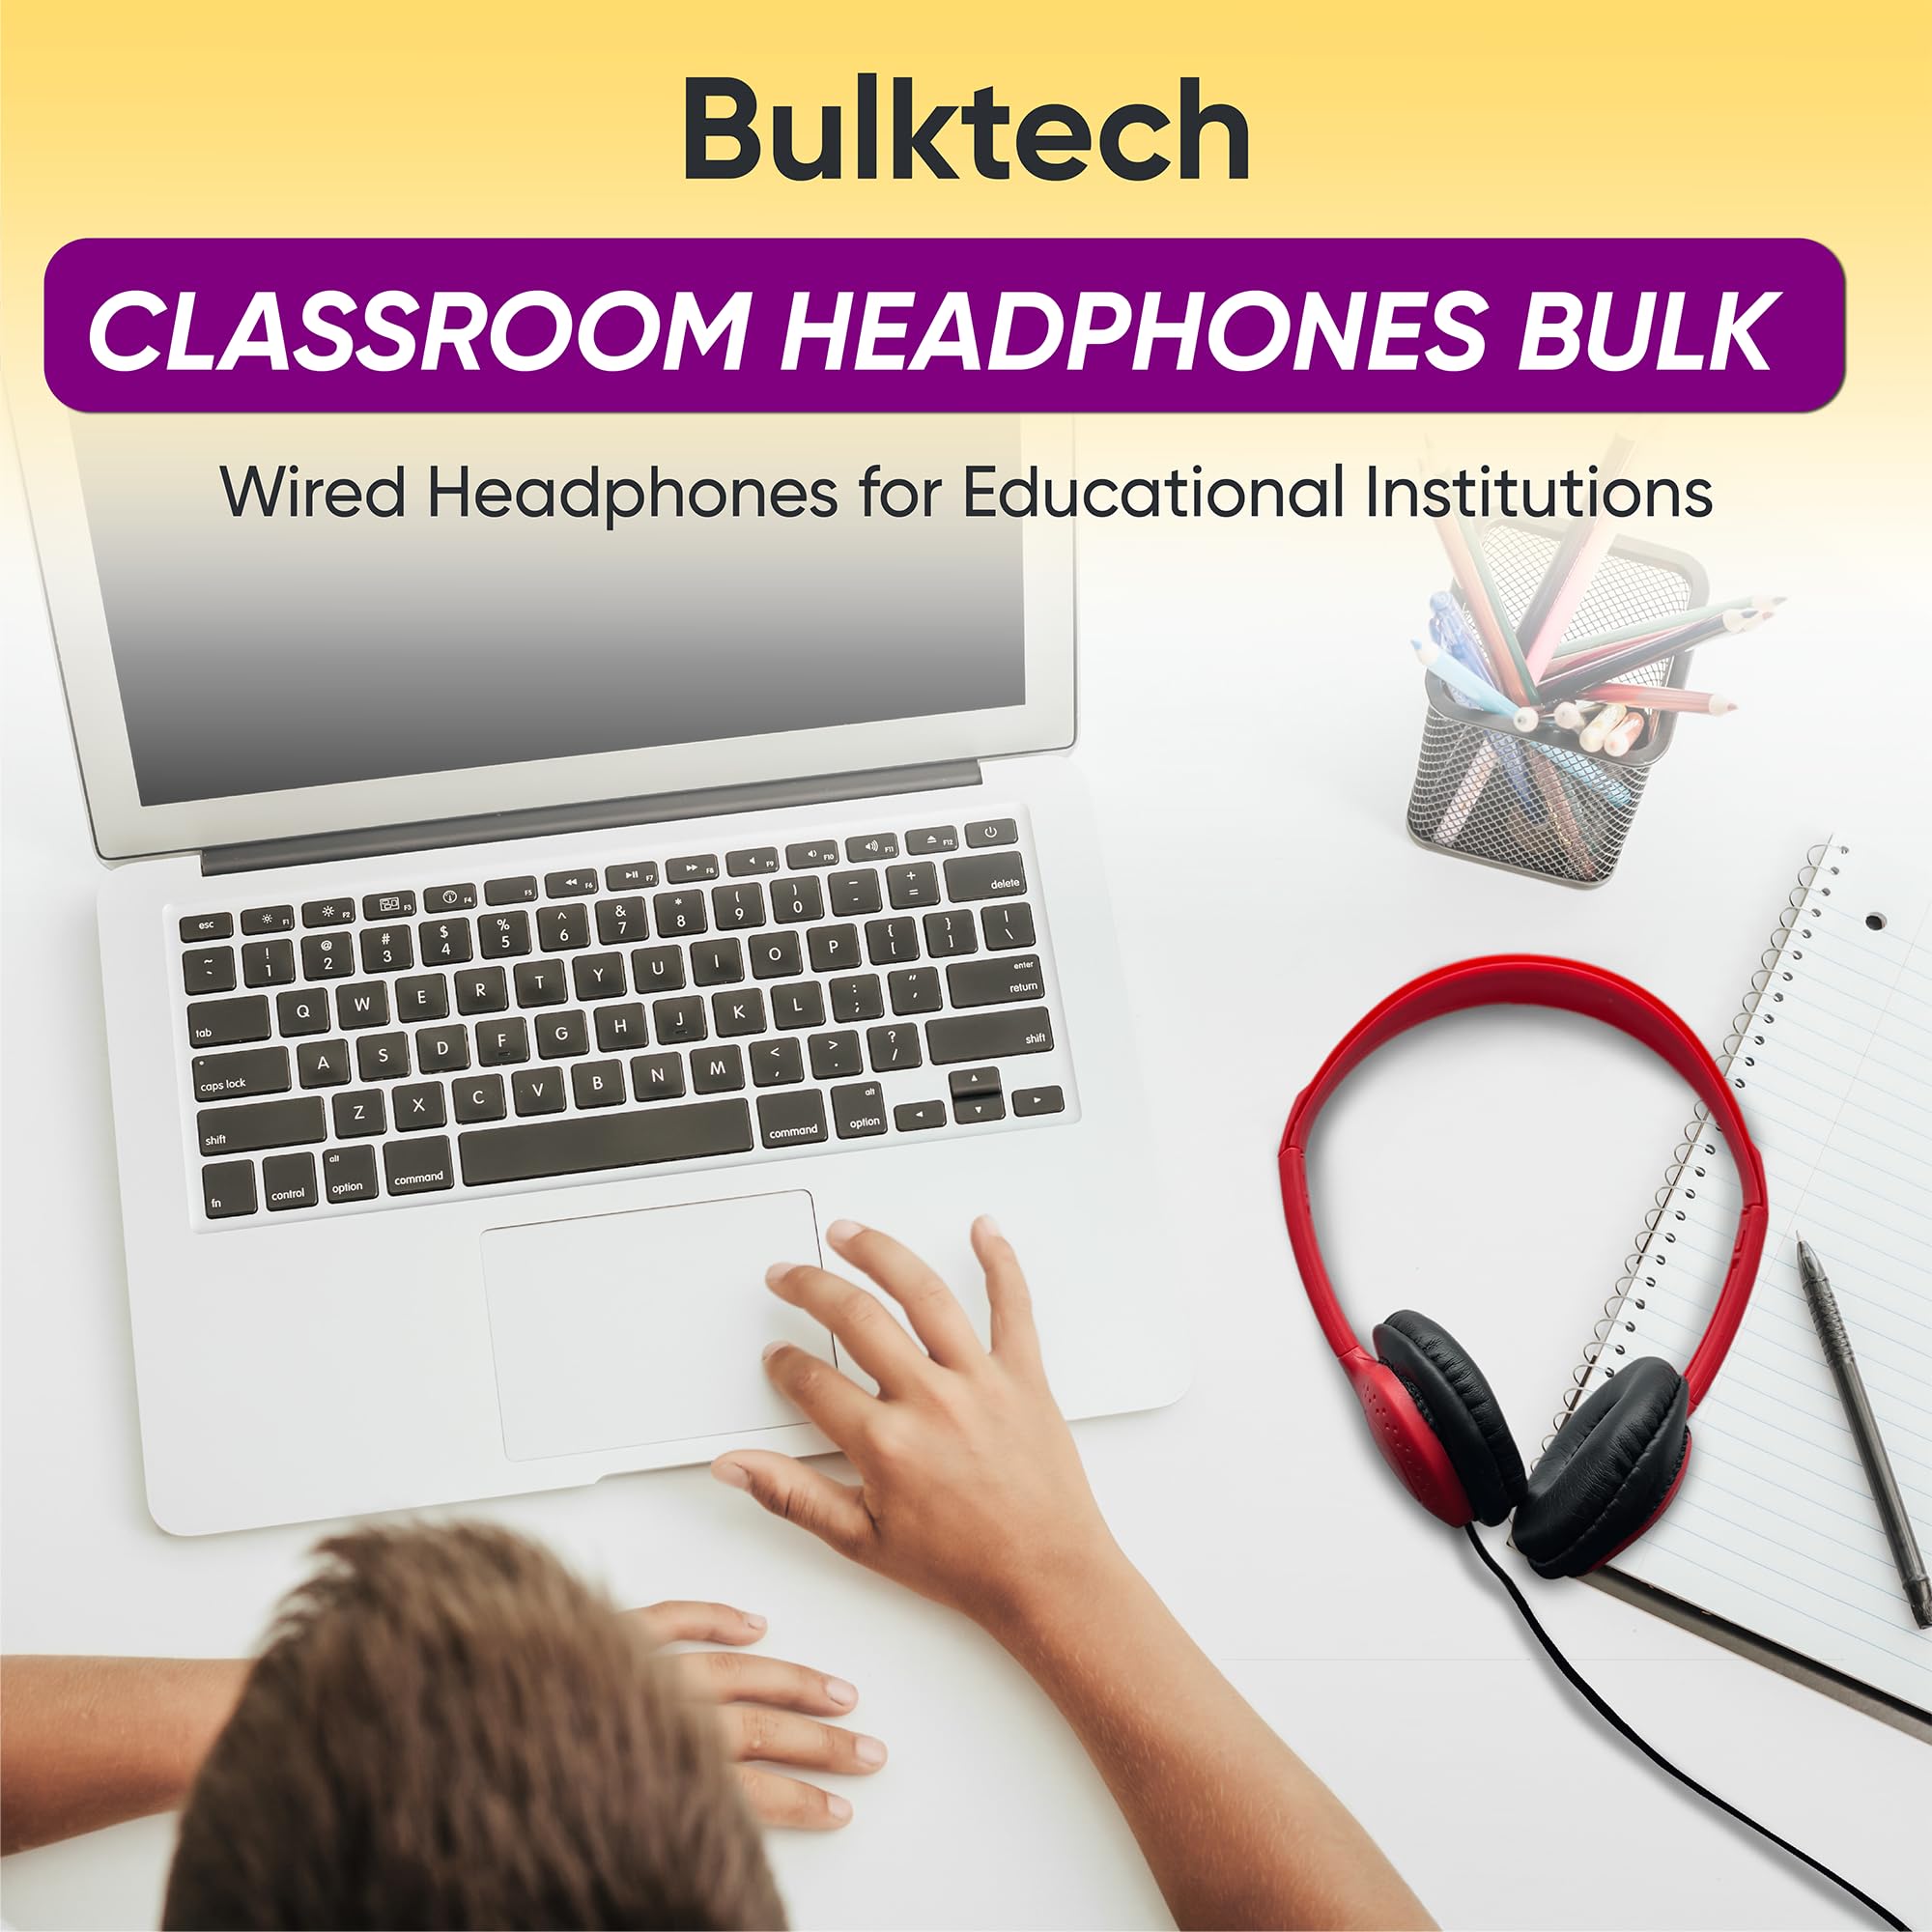 Bulktech Wired On-Ear Leather Headphones with 3.5mm Connector, Bulk Wholesale, 10 Pack, Assorted Colors